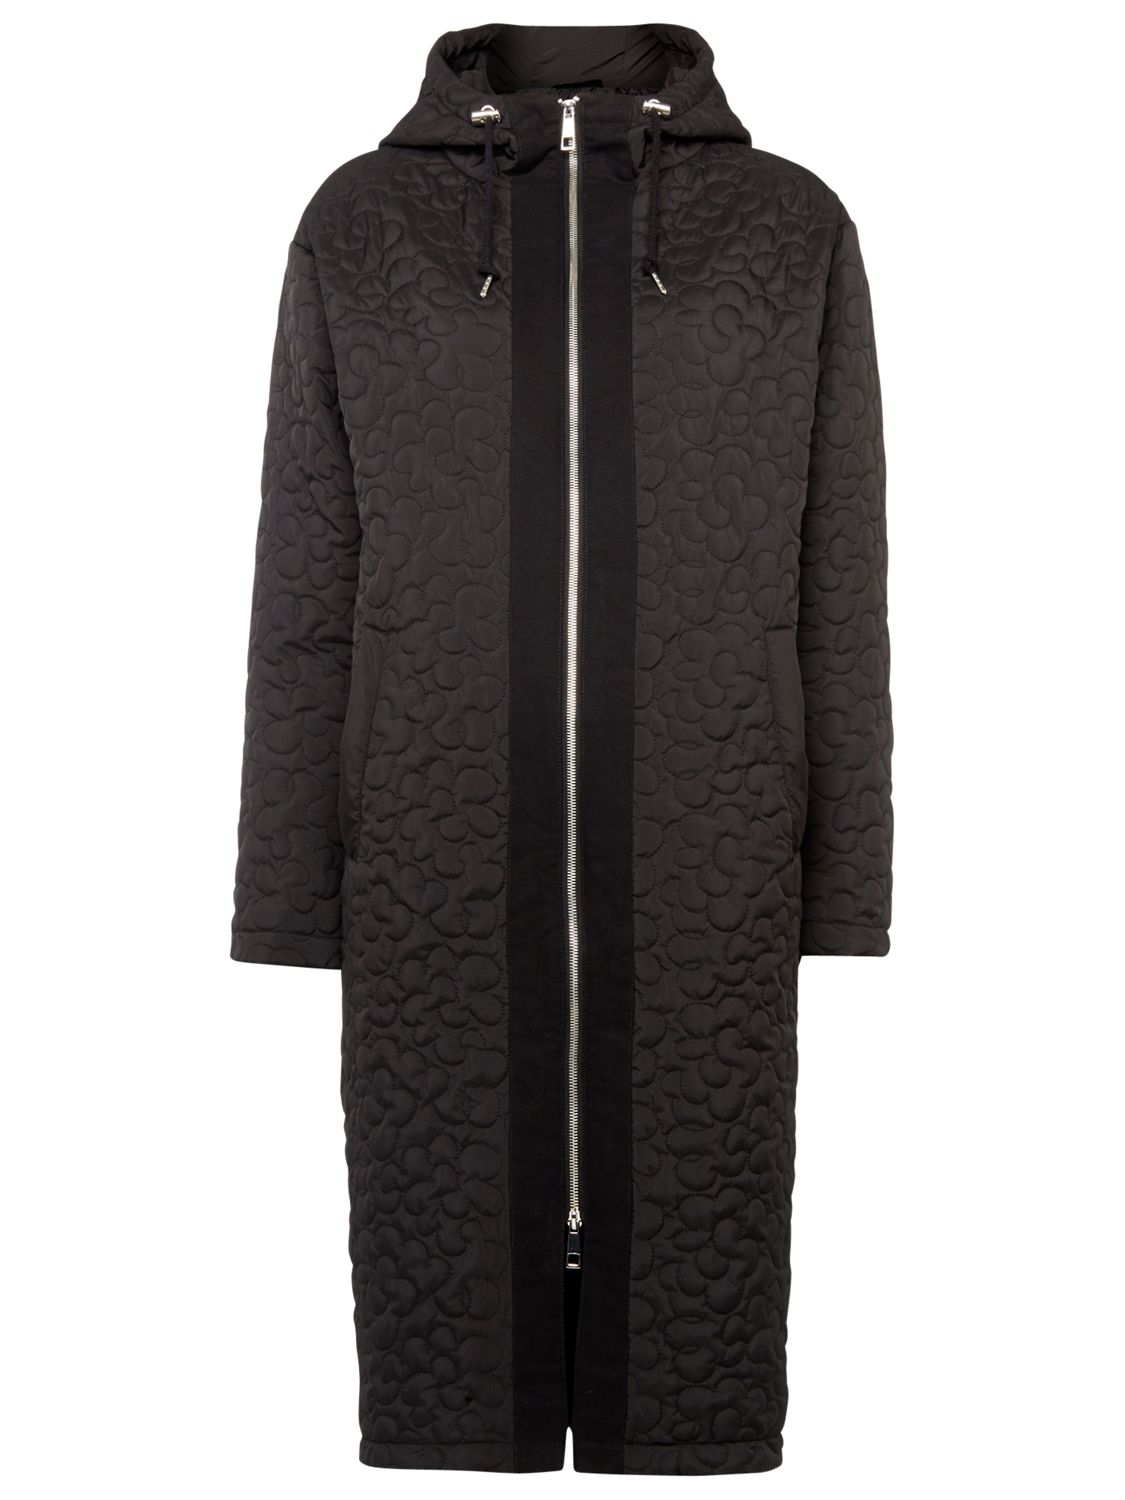 Whistles Quilted Cocoon Parka, Black